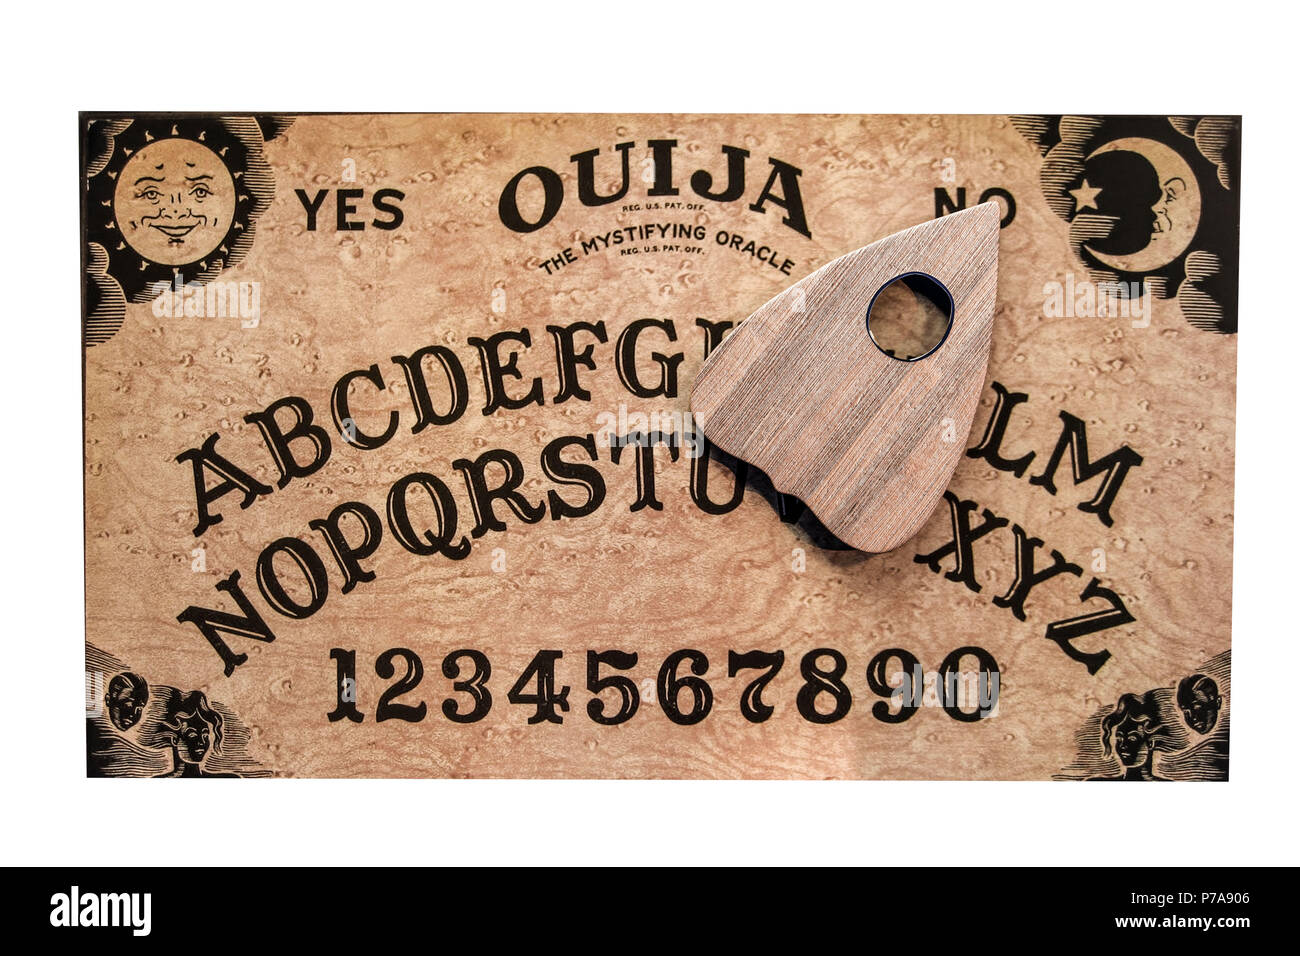 ouija-board-isolated-on-white-background-3d-illustration-P7A906.jpg